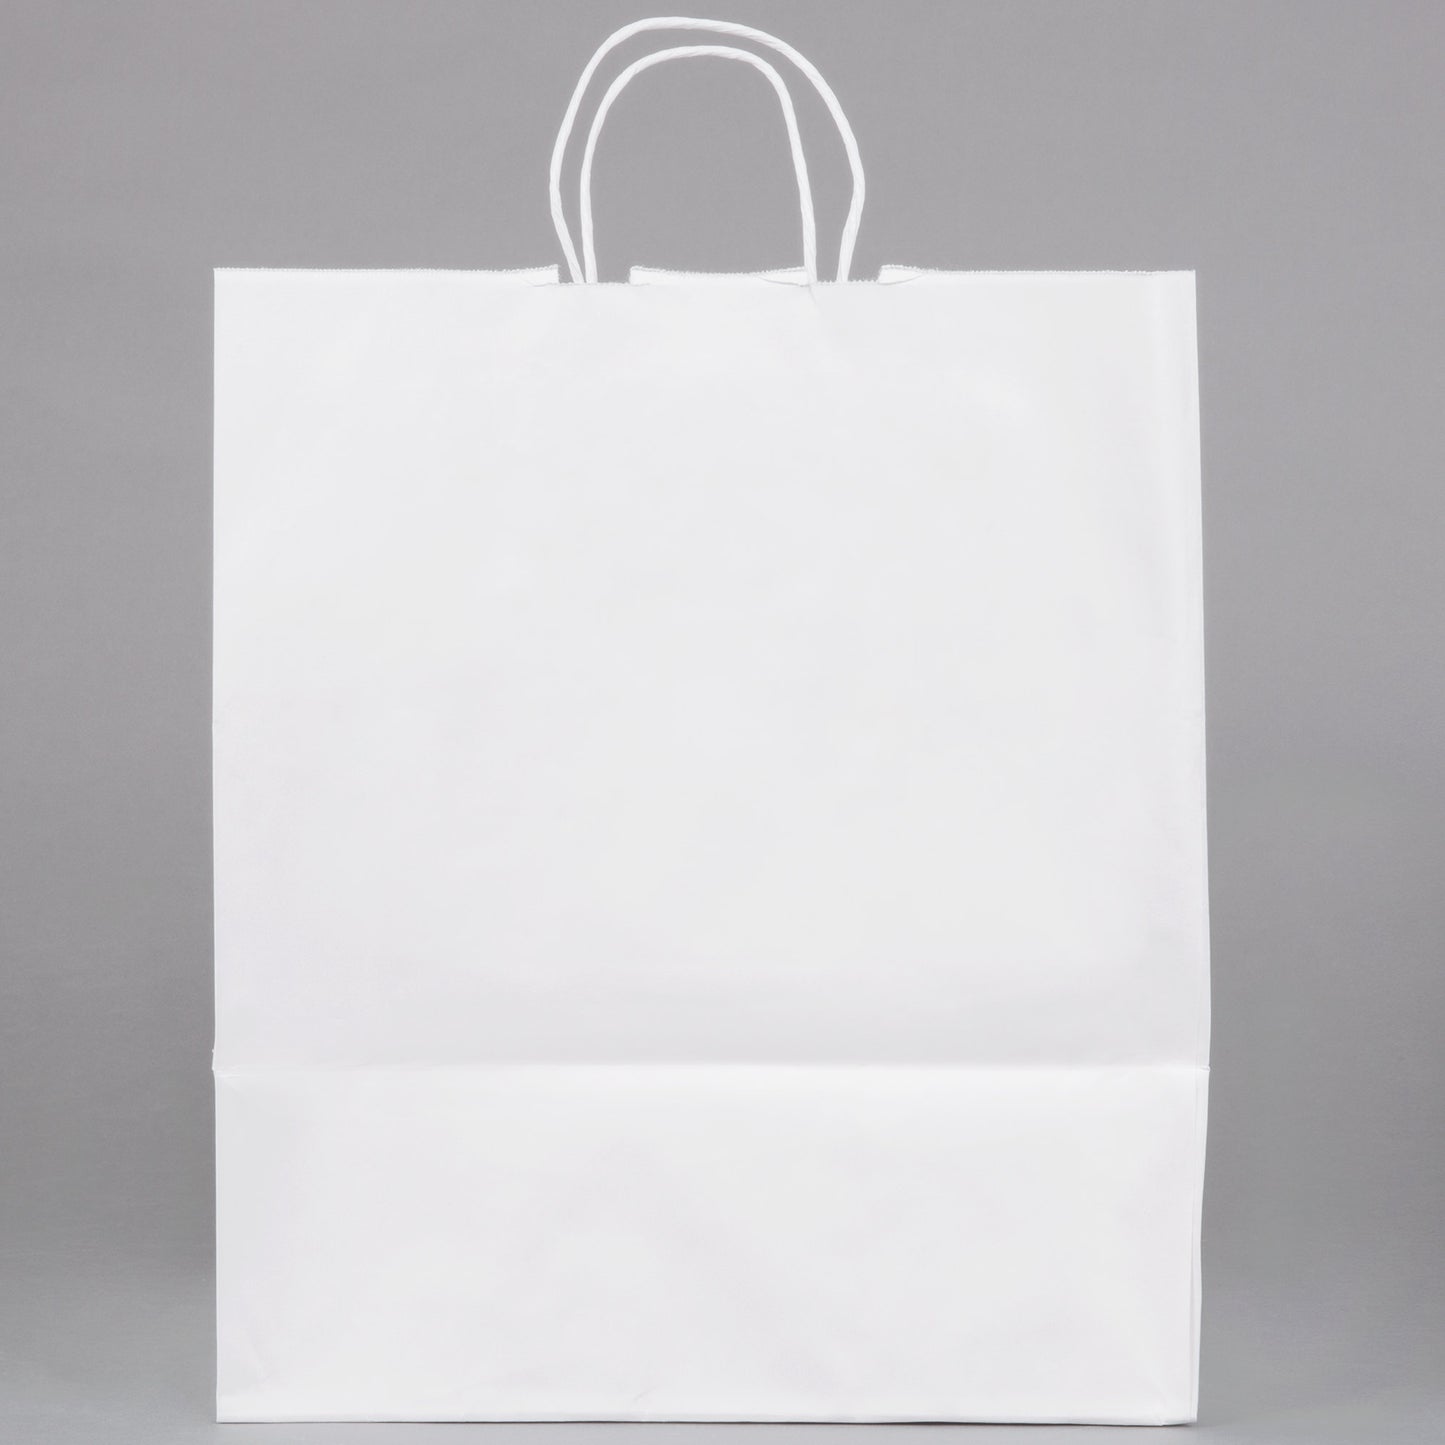 These popular 13in x 6in x 15.75in Duro Bag® 60# White Traveler Paper Shopping Bags with gusseted flat bottom and paper twist handles are BPI® and SFI® certified. Sold 250 per bundle.